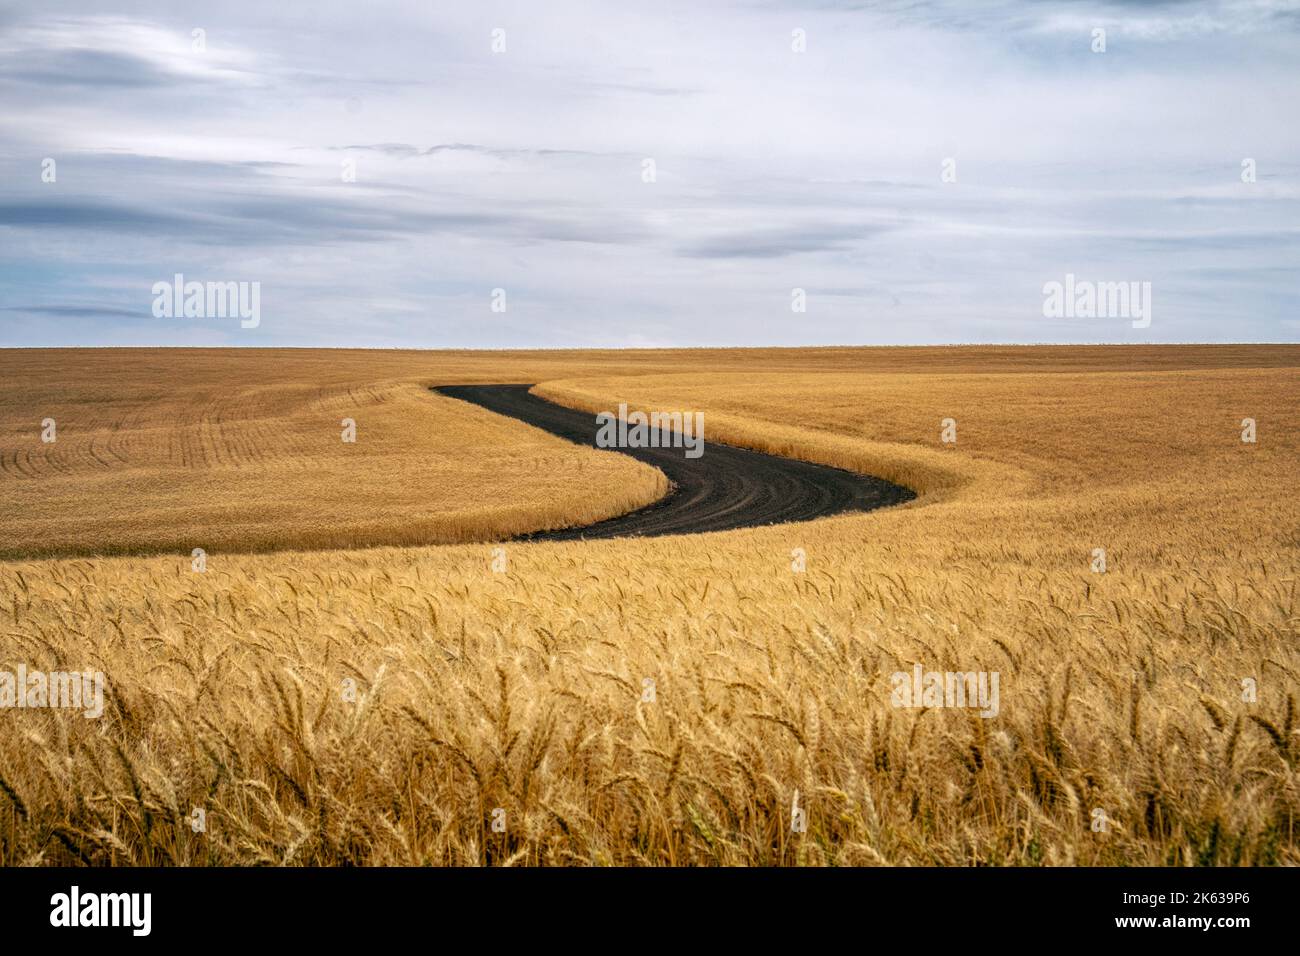 Winding road through a wheatfield in the Palouse region of eastern Washington State, USA Stock Photo